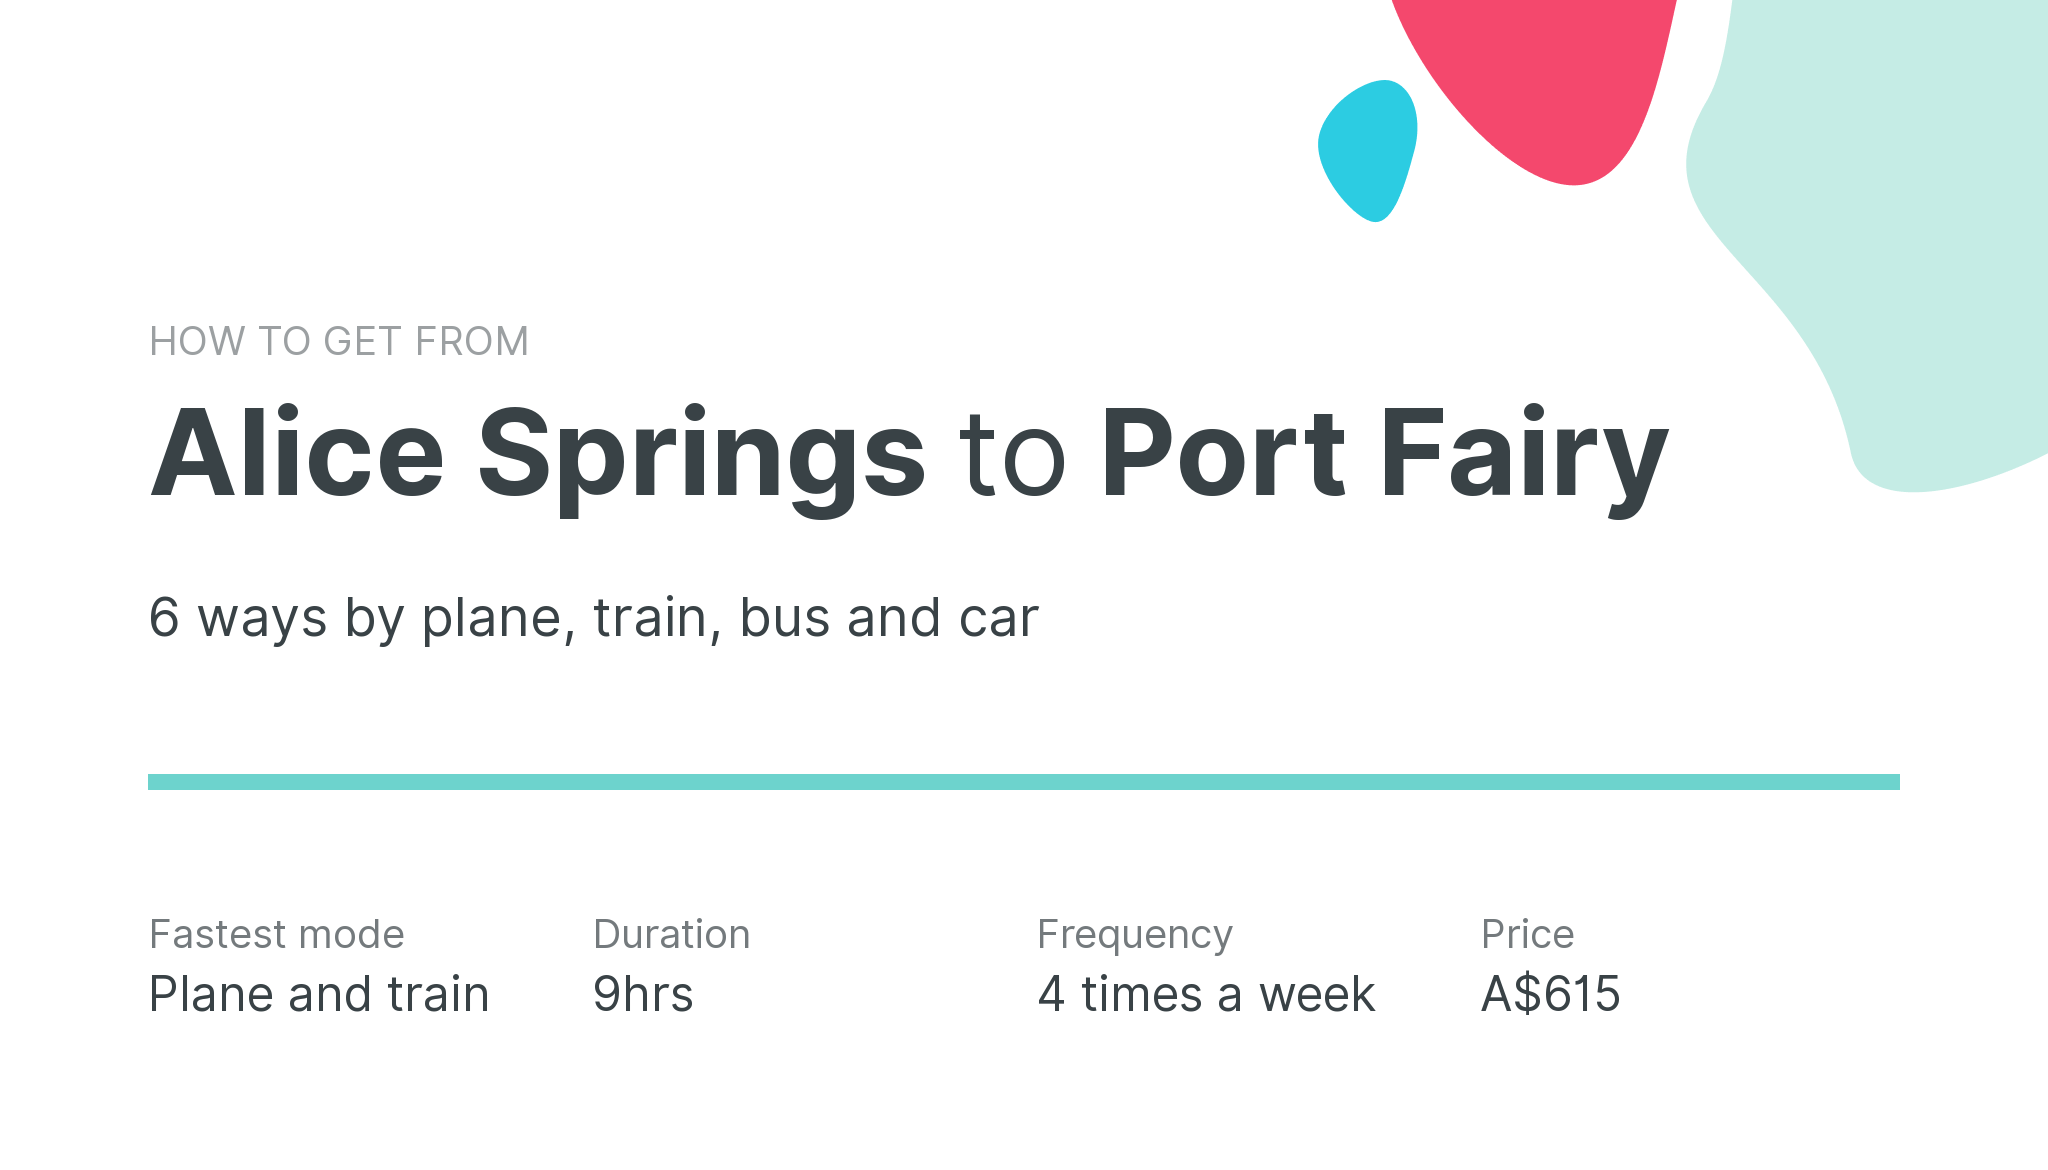 How do I get from Alice Springs to Port Fairy